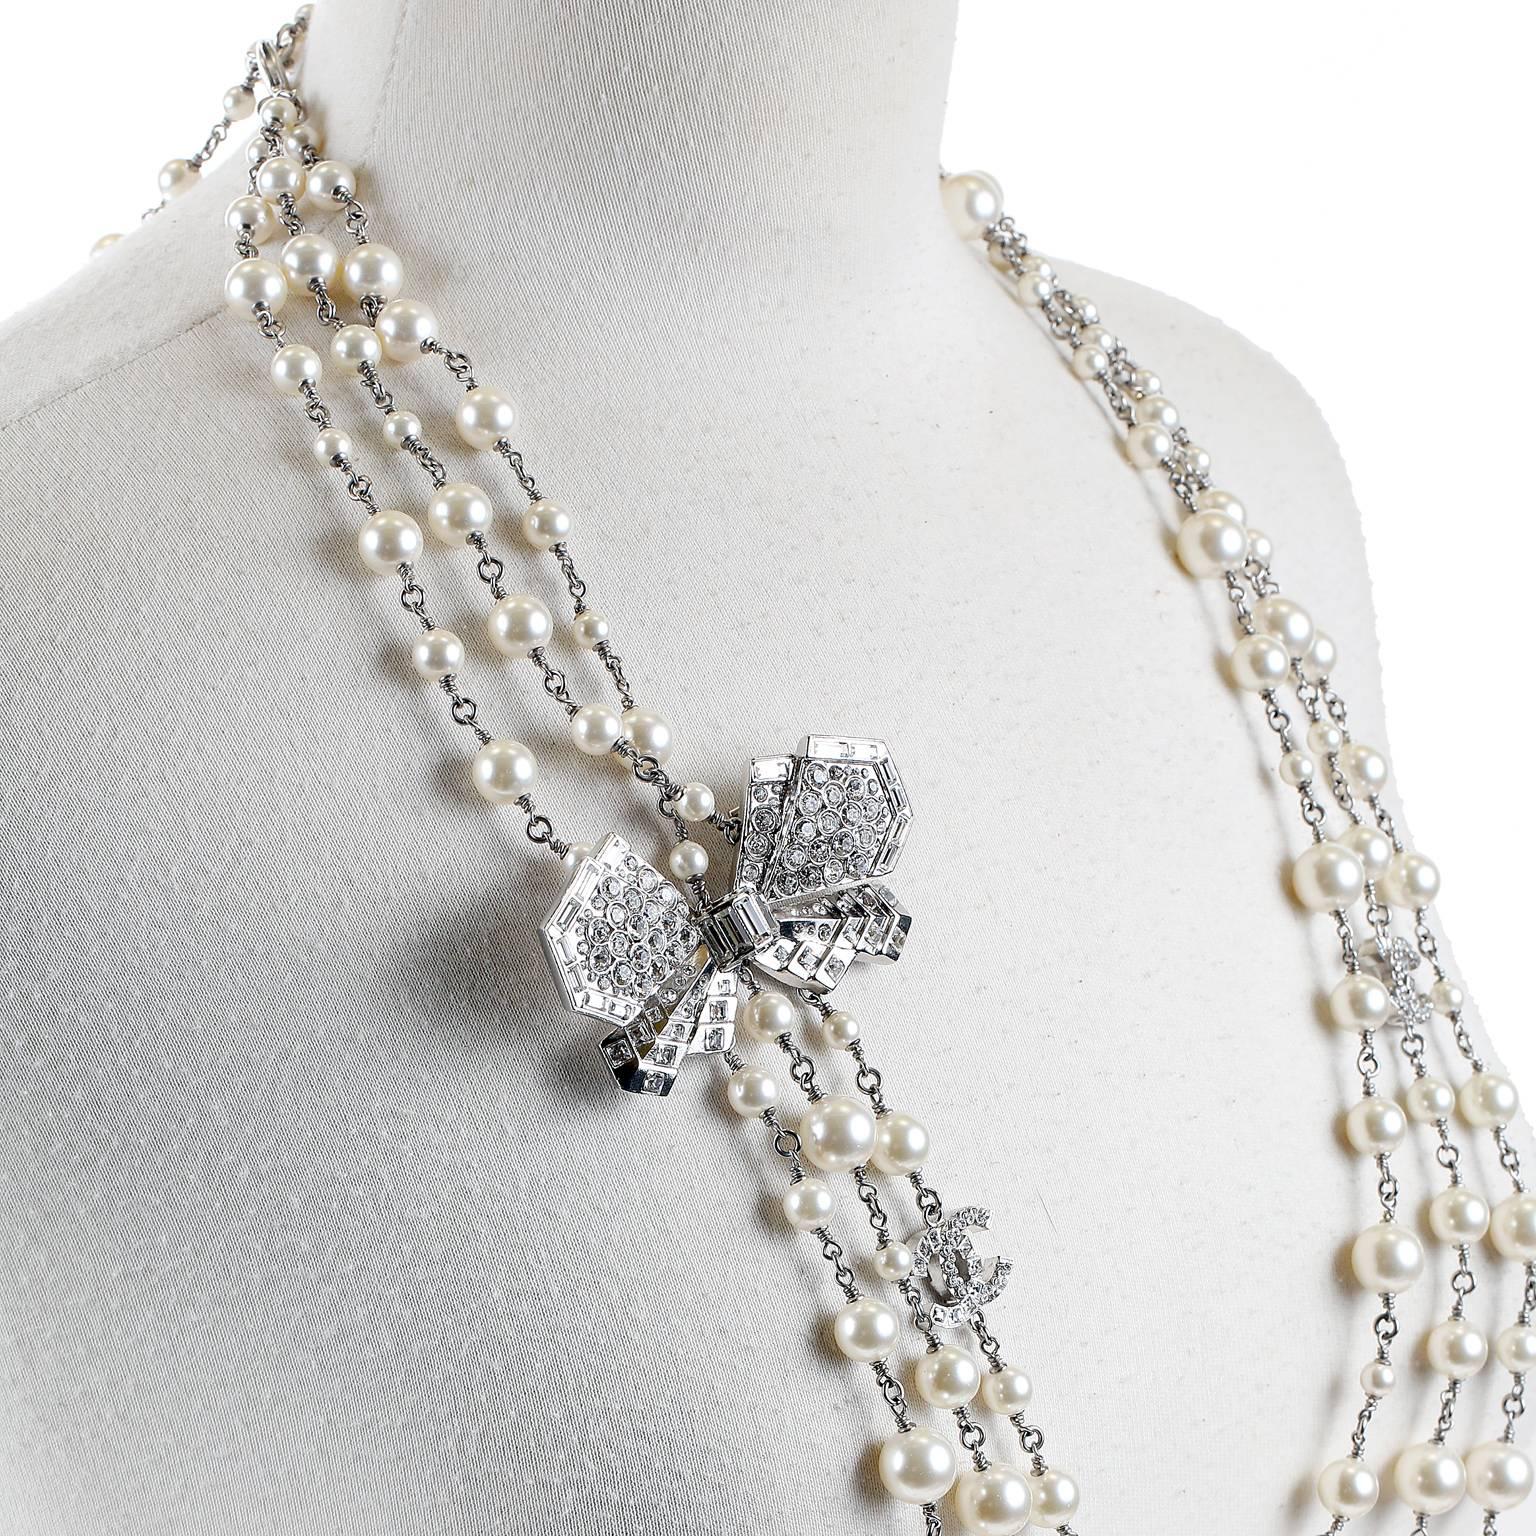 Chanel Crystal Butterfly Triple Strand Pearl Necklace- PRISTINE
  A breathtaking piece that is sure to have collectors swooning.  
Triple strand of various sized pearls on silver tone chain.  Art deco crystal encrusted large butterfly seemingly